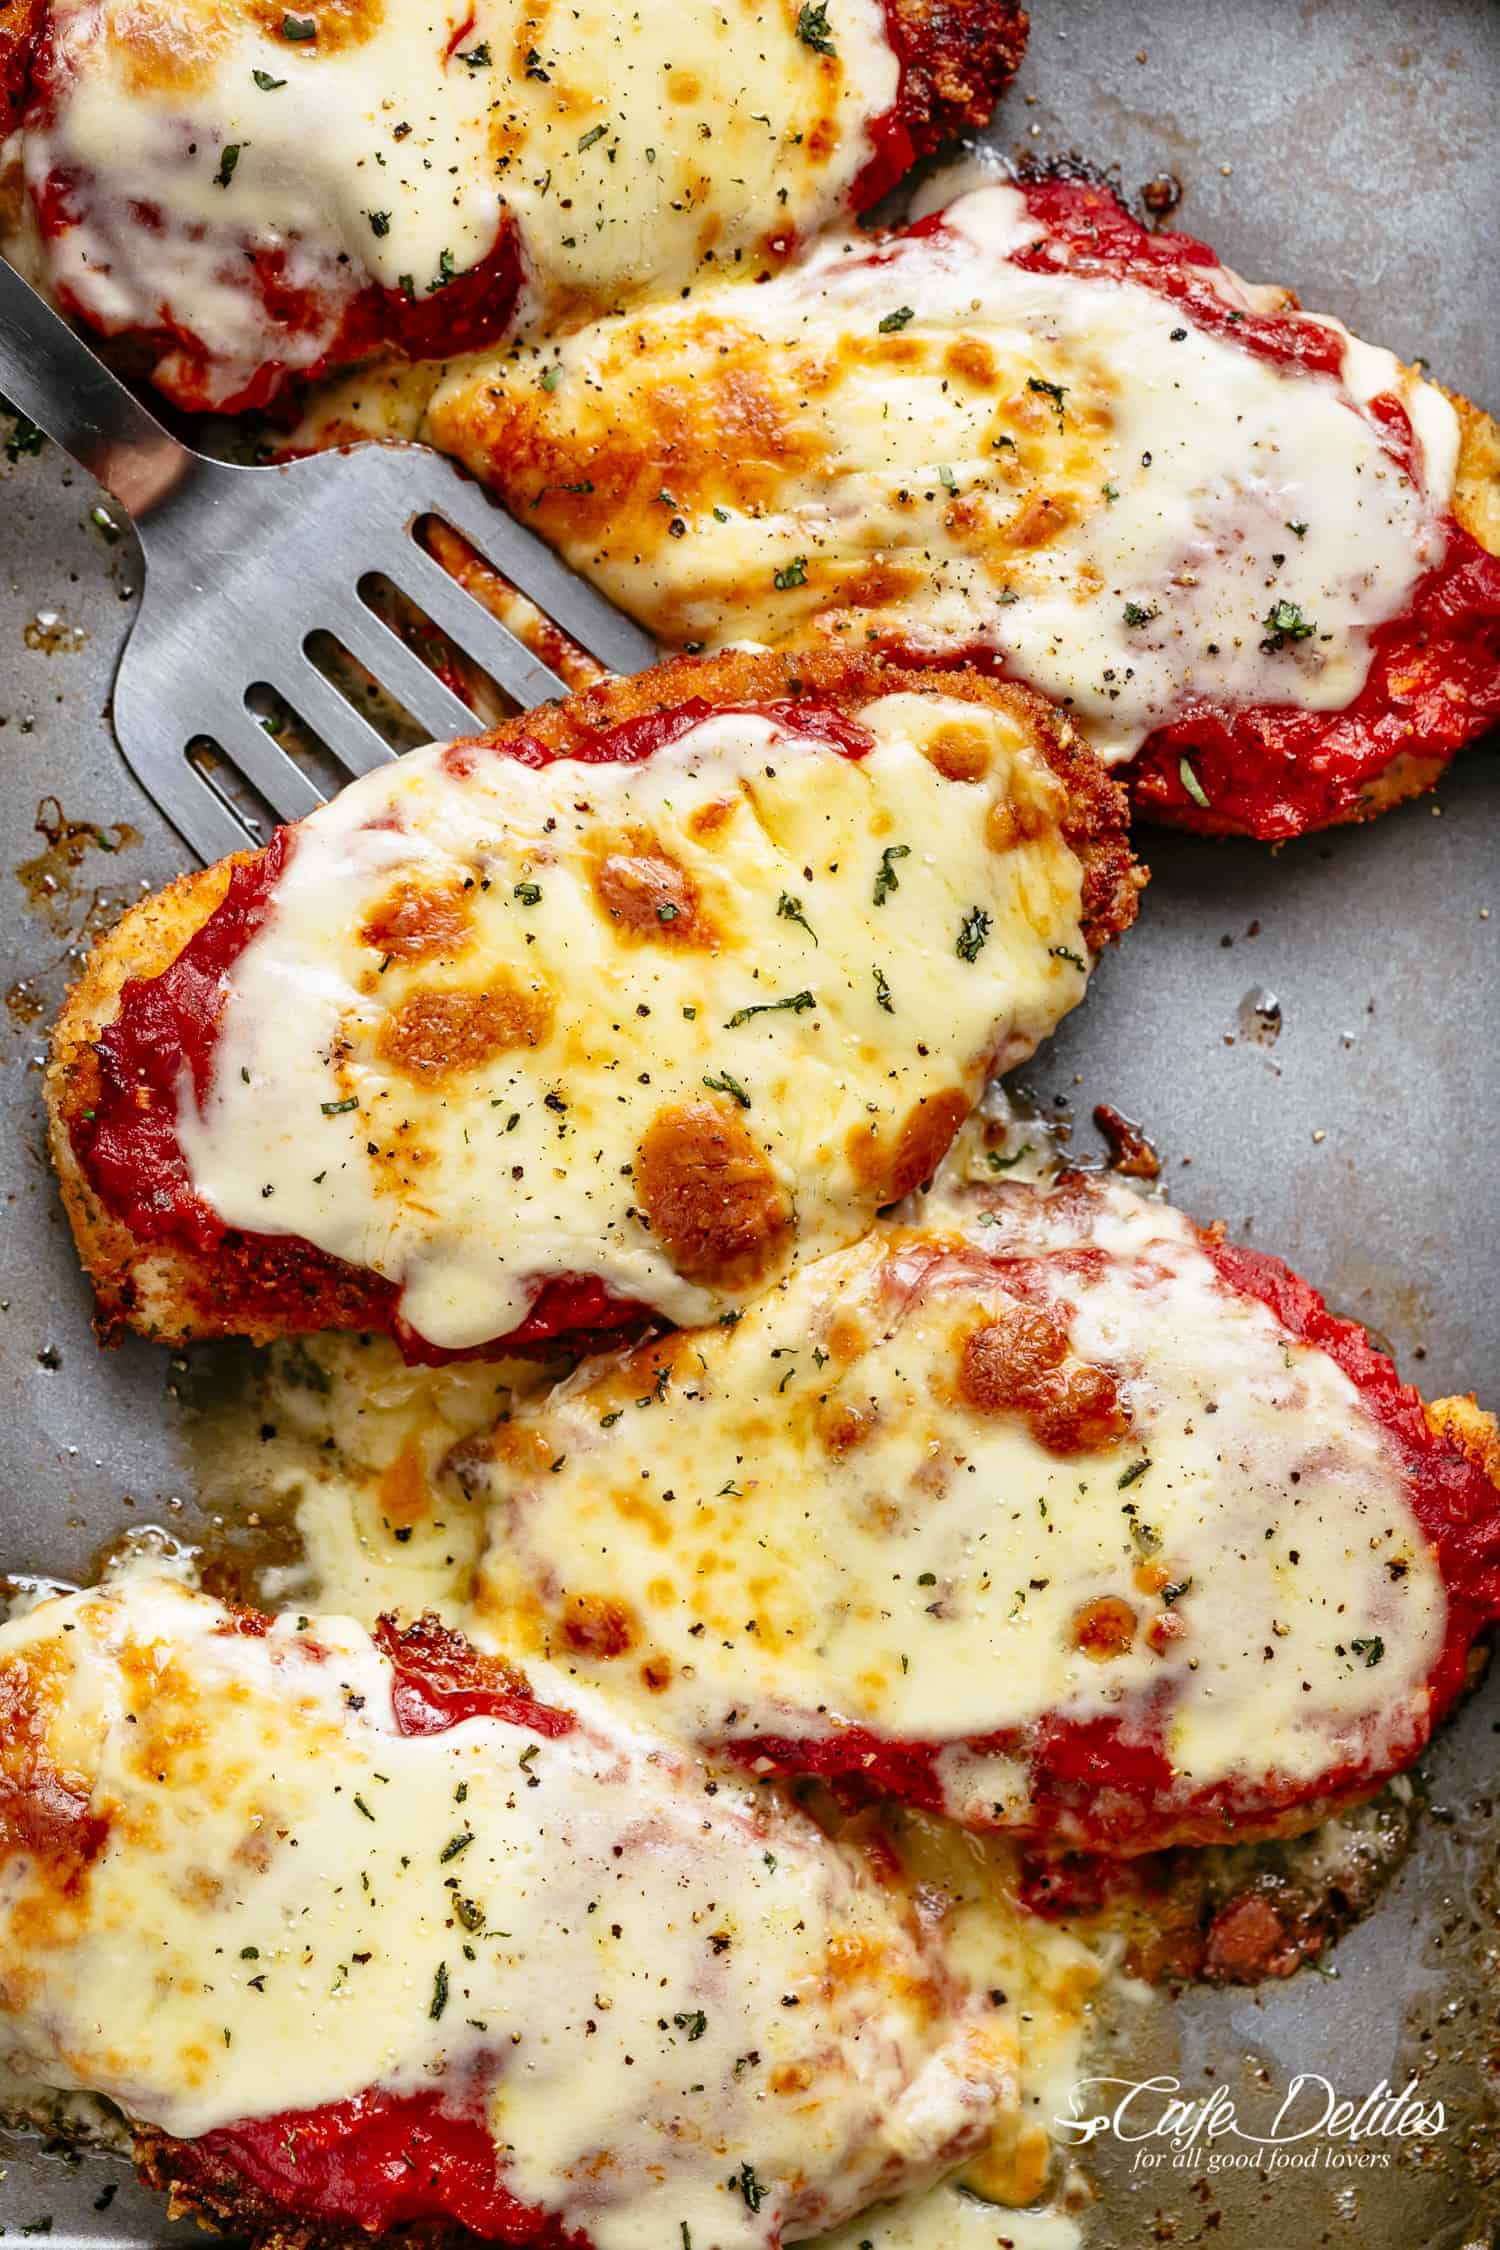 The Best Chicken Parmesan with a deliciously crispy breadcrumb coating, smothered in a rich homemade tomato sauce and melted mozzarella cheese! This is here best Chicken Parmesan you will ever make! Simple to make and worth every minute. If you love a crispy crumb coating vs soggy crumb, look no further! Five chicken parmesan on a baking sheet fresh, out of the oven with a silver spatula ready to serve!  | cafedelites.com